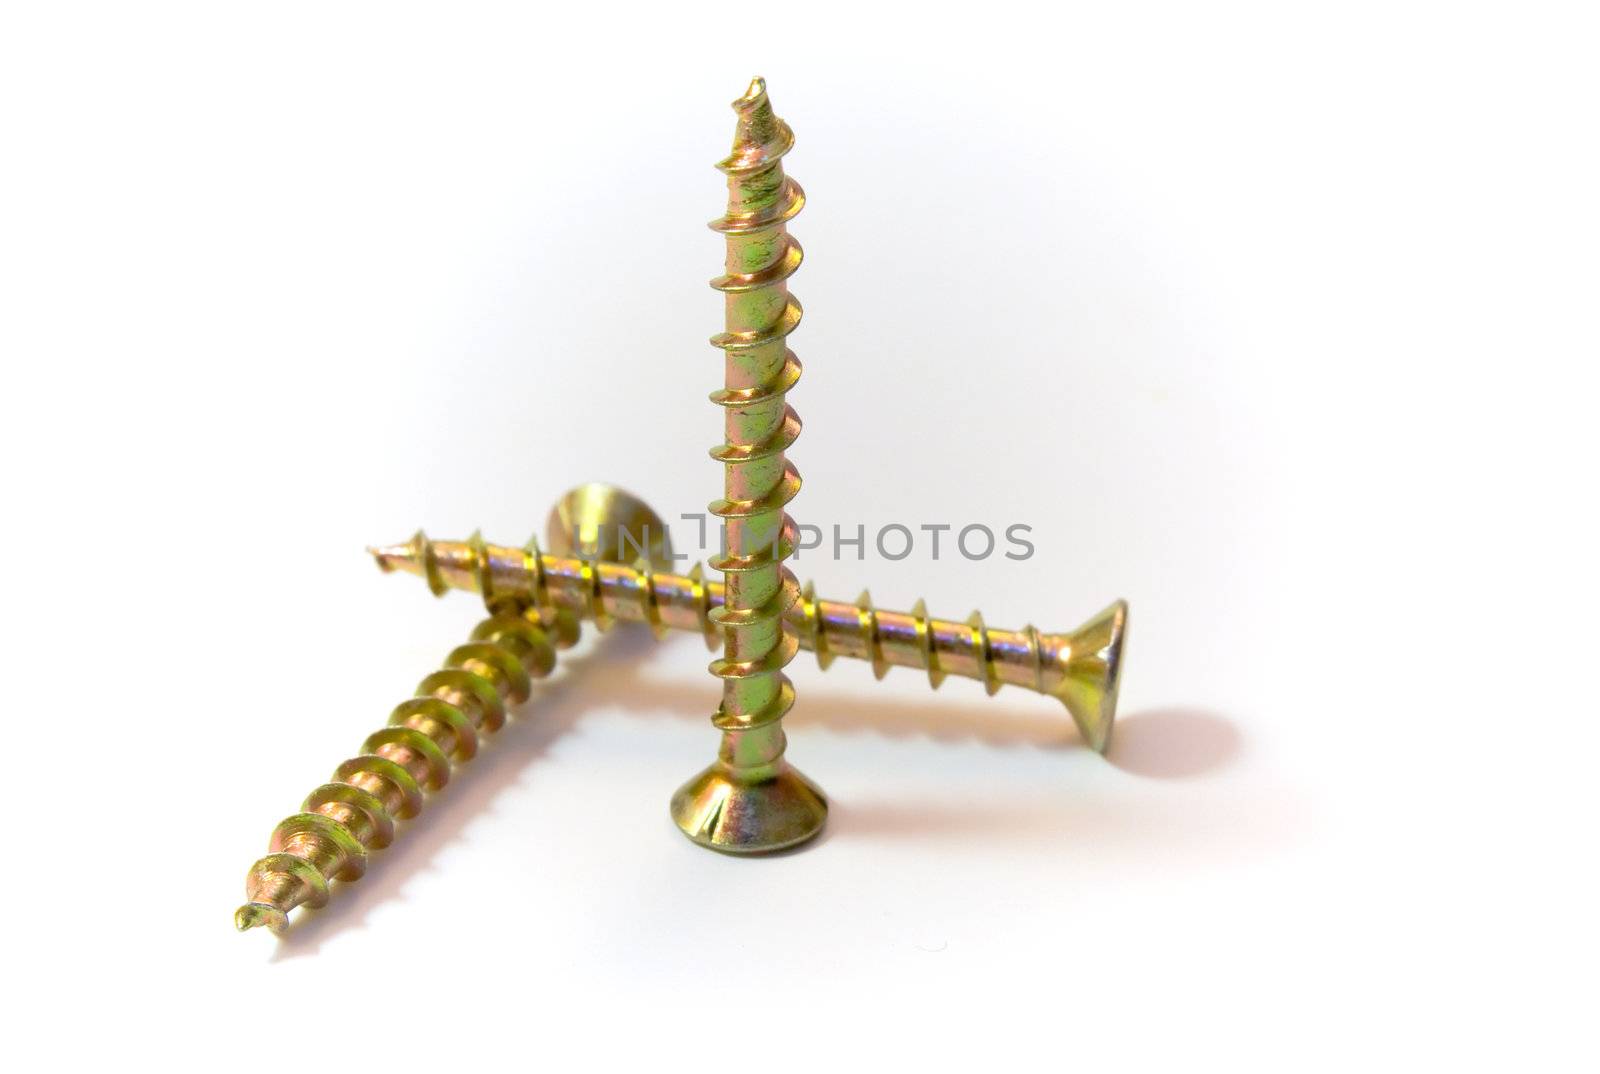 Three zinced screws, are photographed on a white background